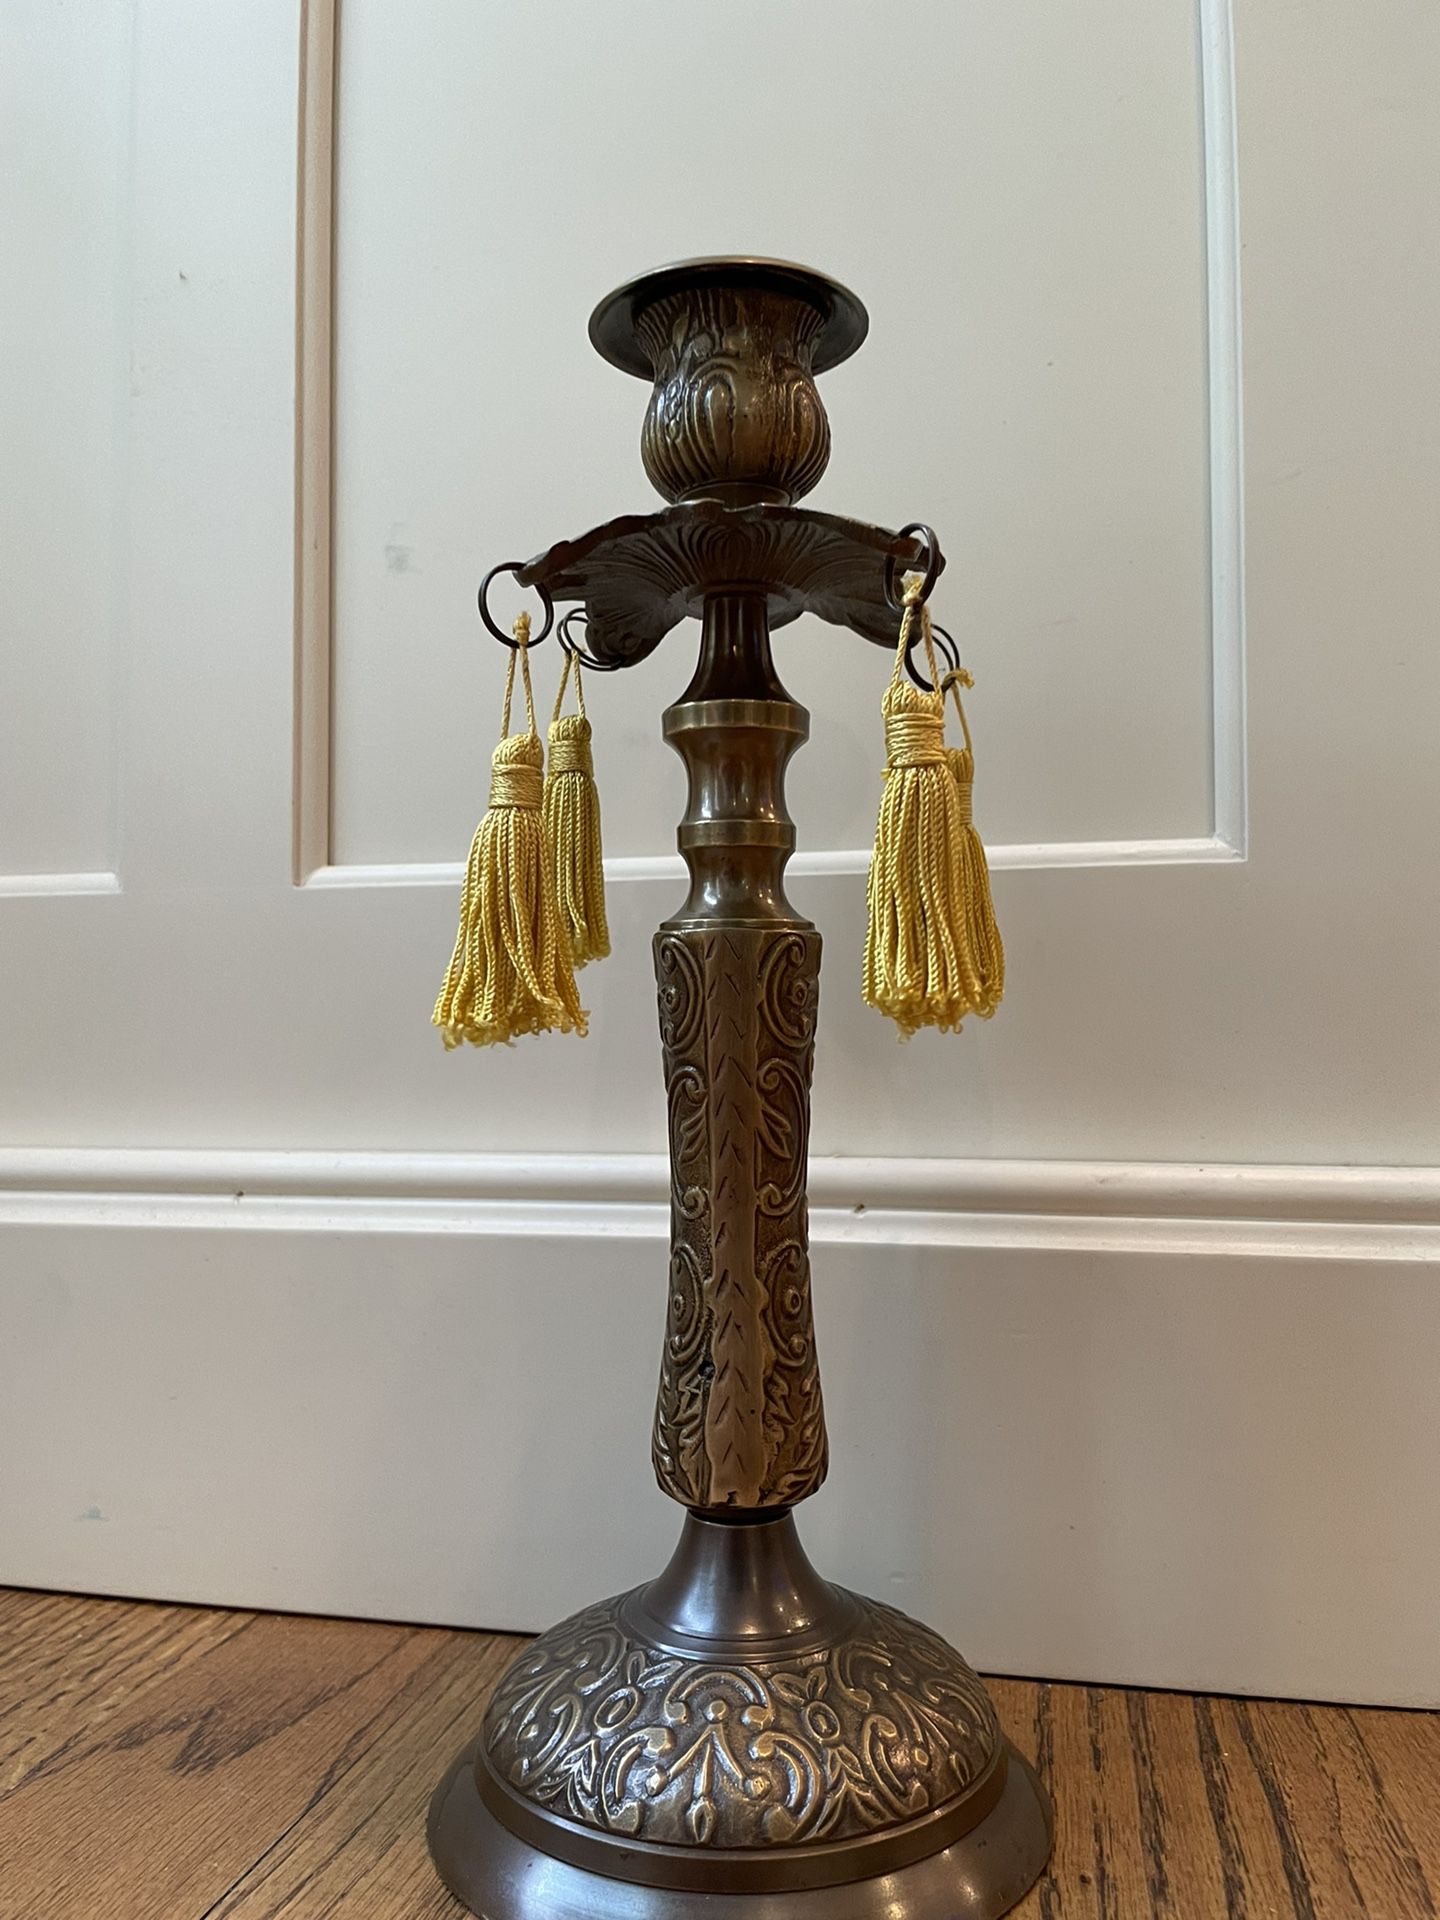 Vintage 12" Brass and Metal Tassel Candle Stick Holder Made in India. Condition is pre owned and is overall in very solid and respectable shape. This 